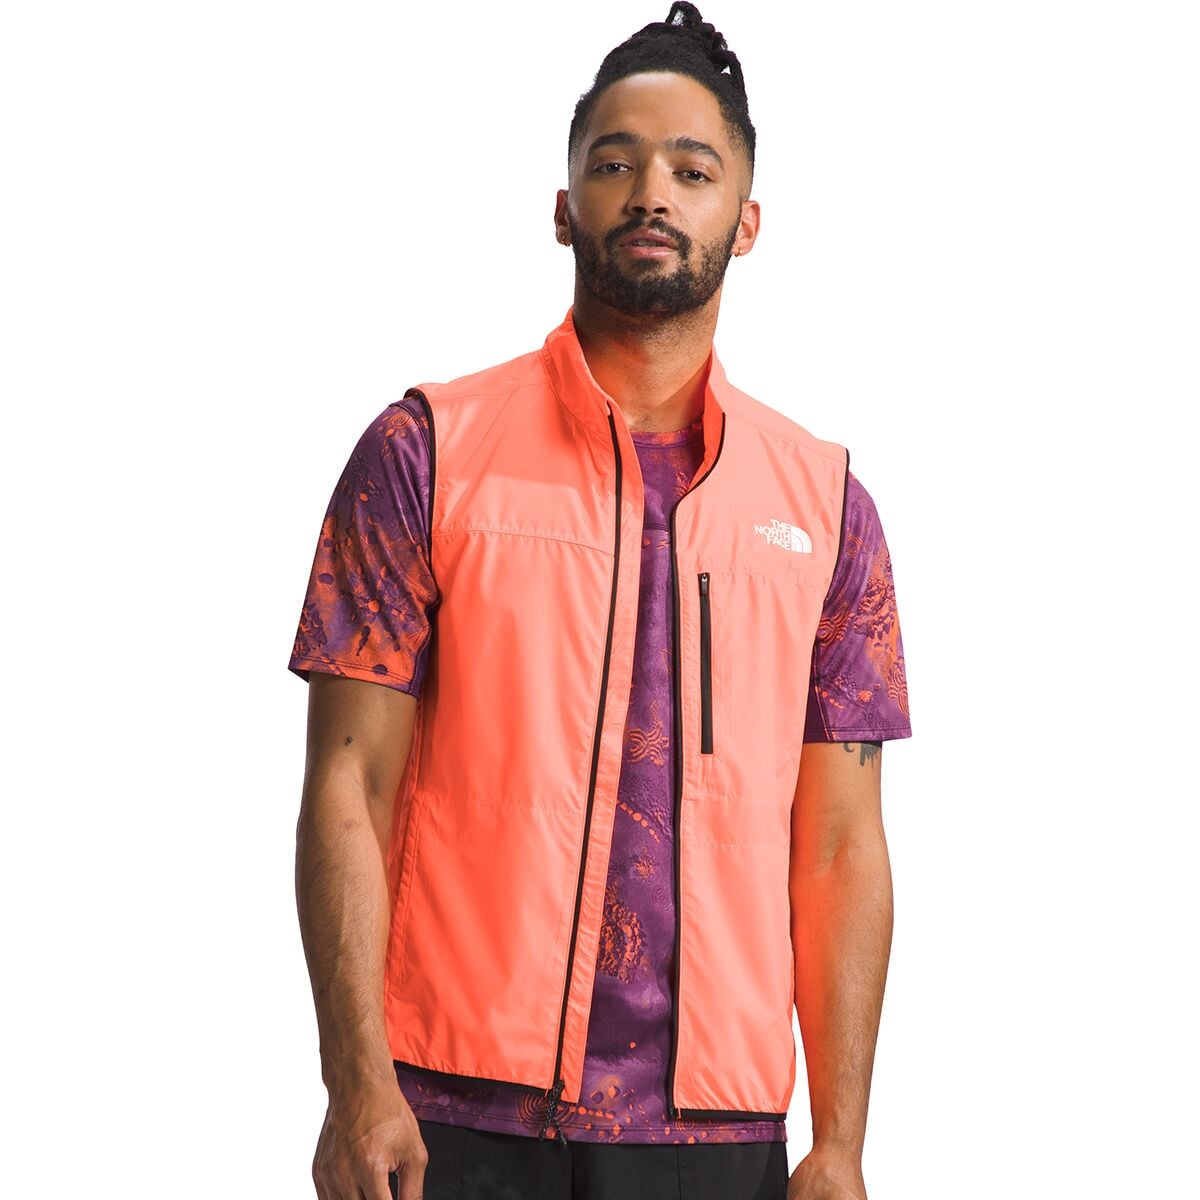 The North Face Higher Run Wind Vest - Men's Vivid Flame, S